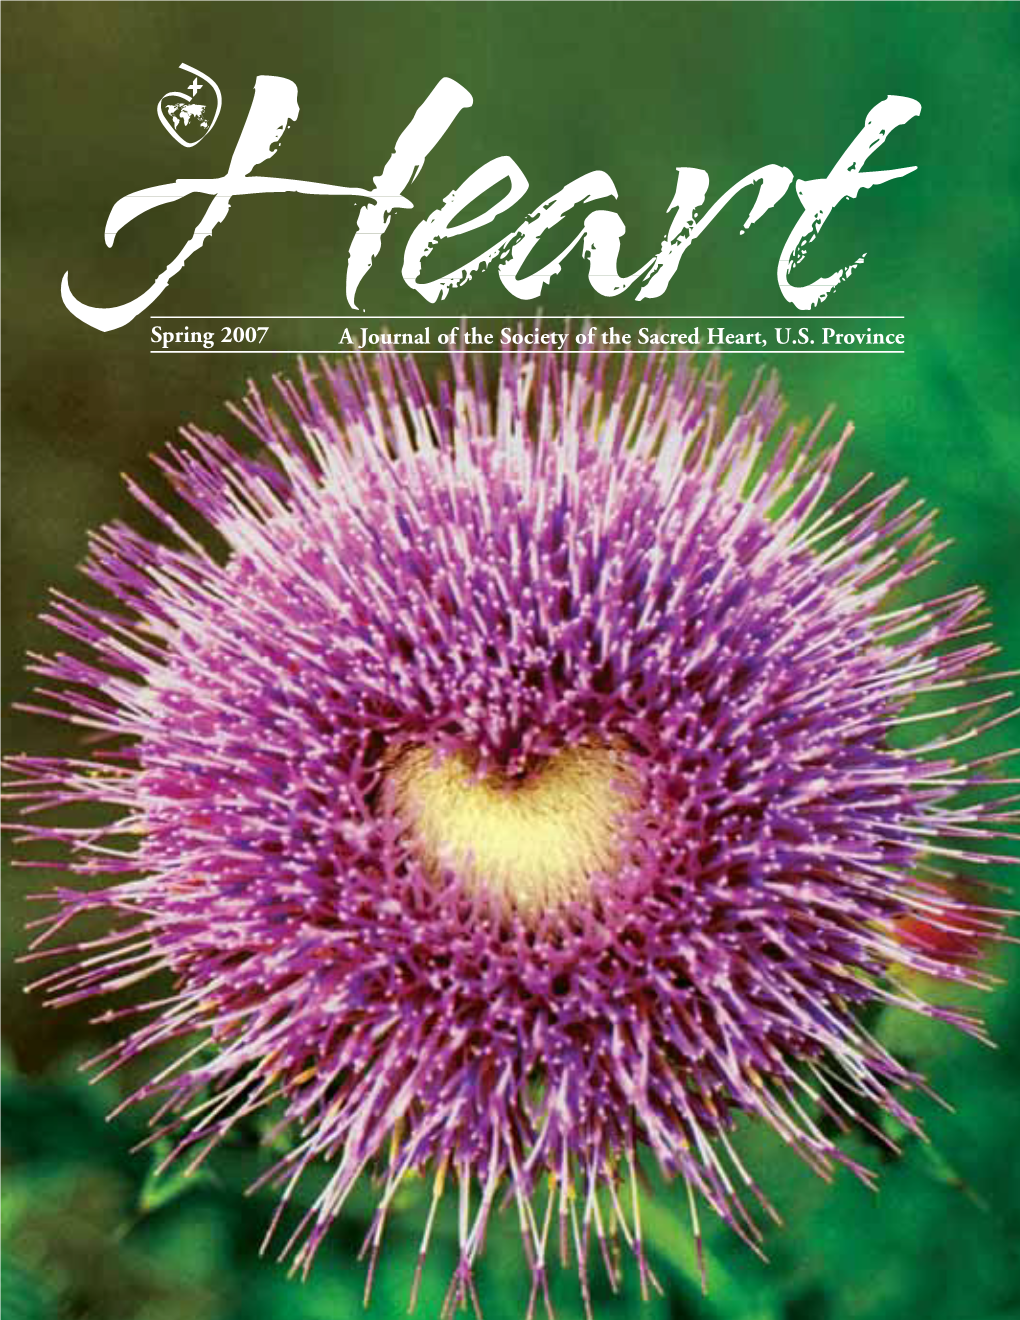 Spring 2007 a Journal of the Society of the Sacred Heart, U.S. Province …To Heart